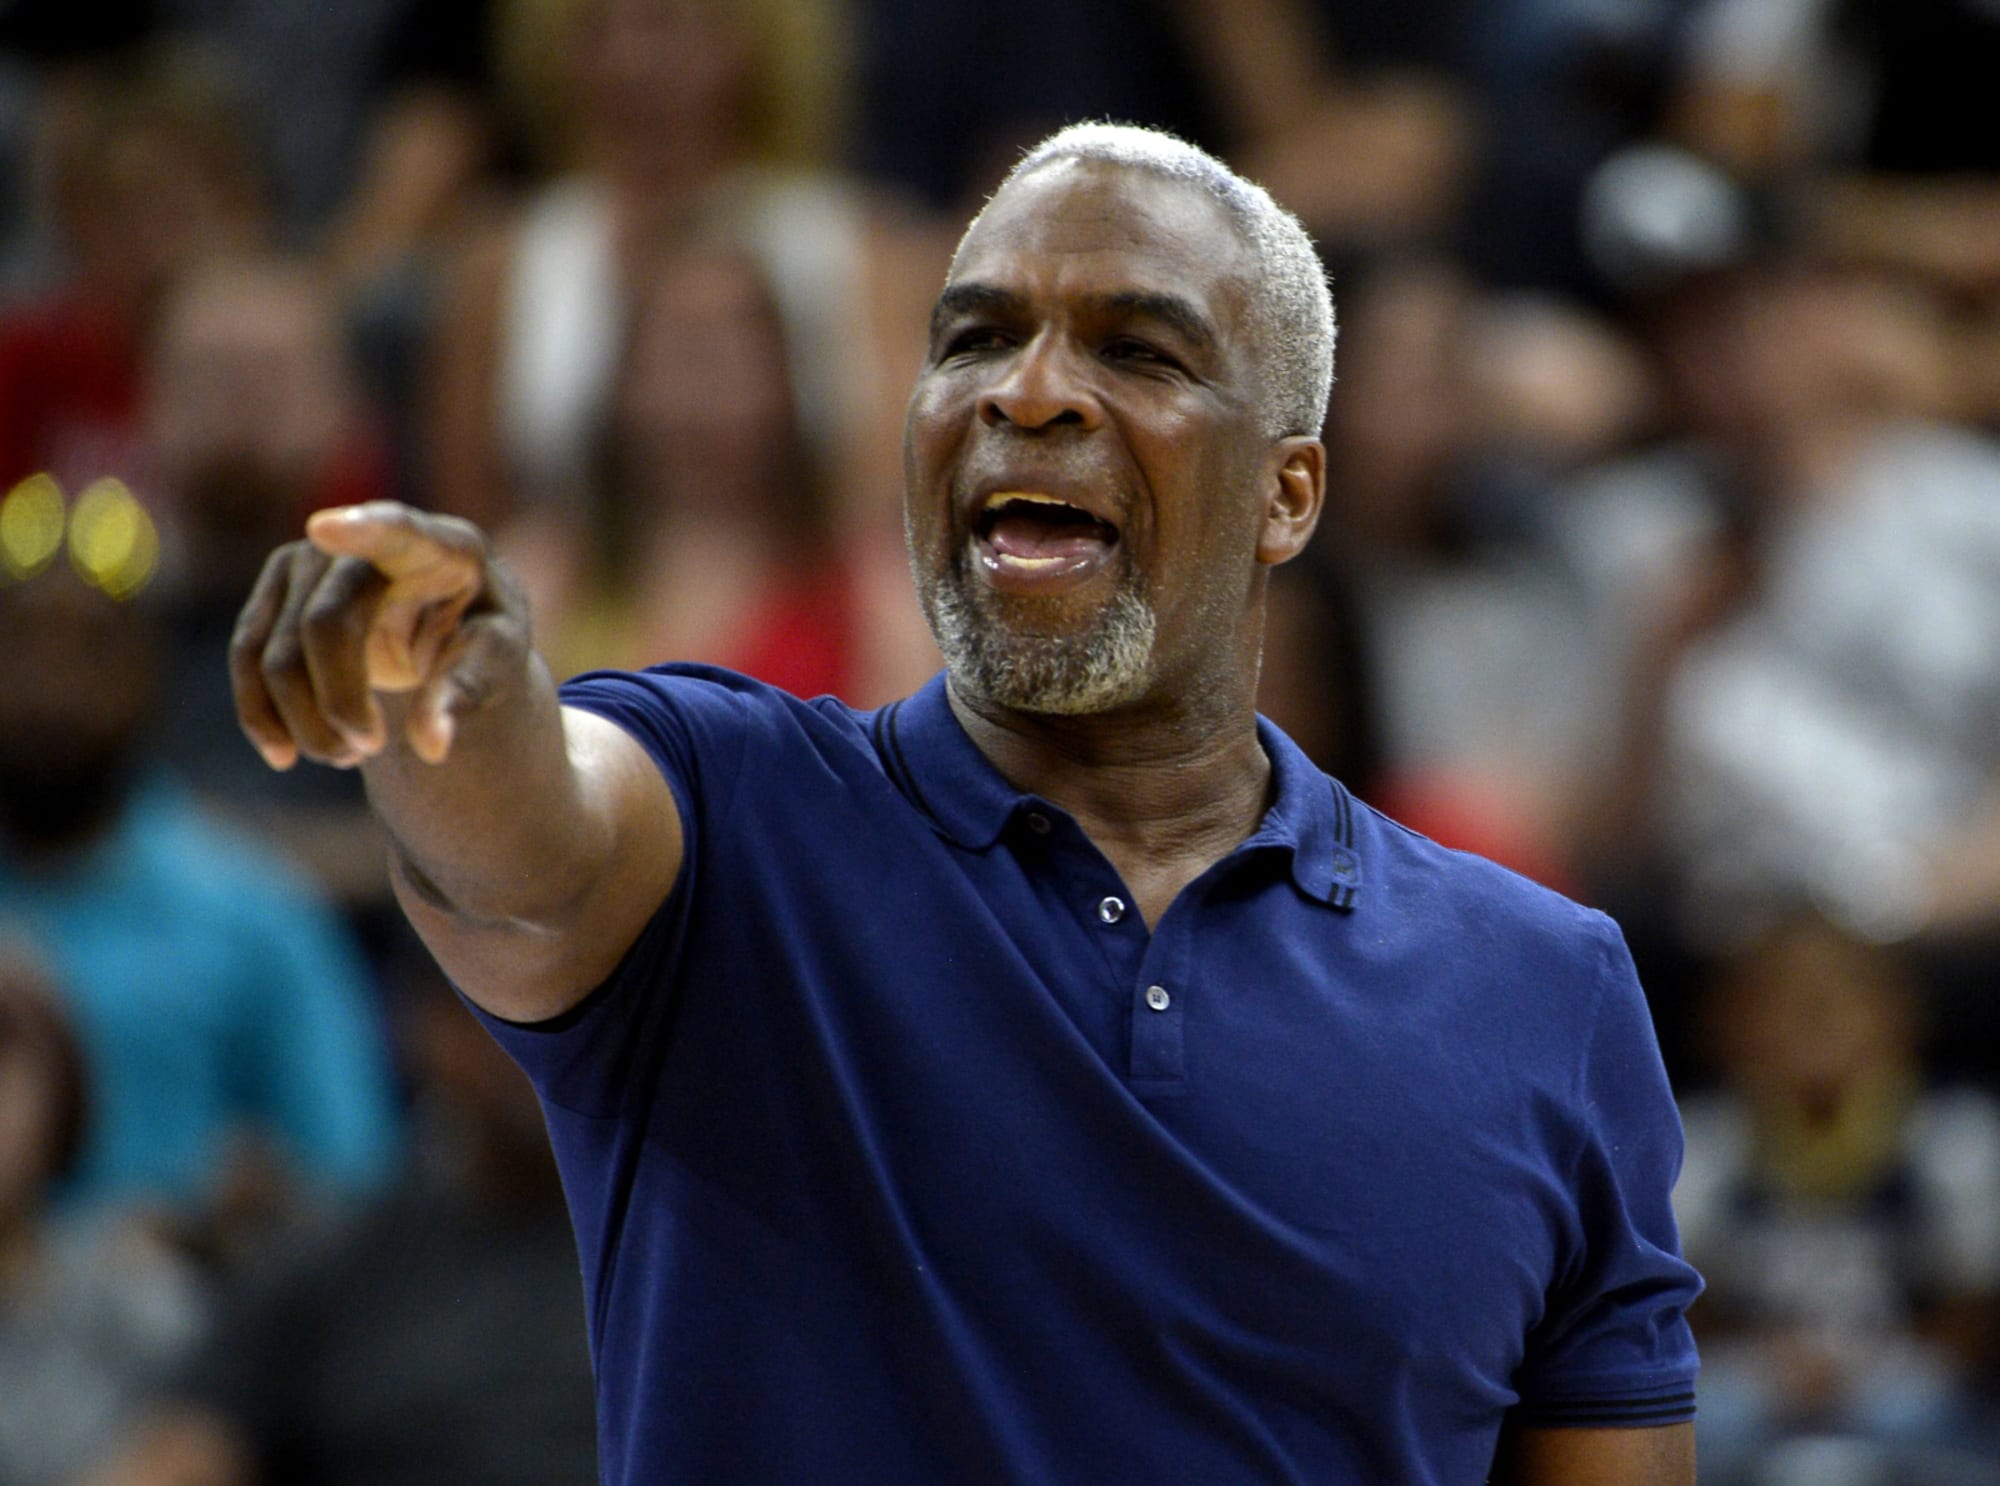 Knicks: Charles Oakley joins the cast of Dancing with the Stars